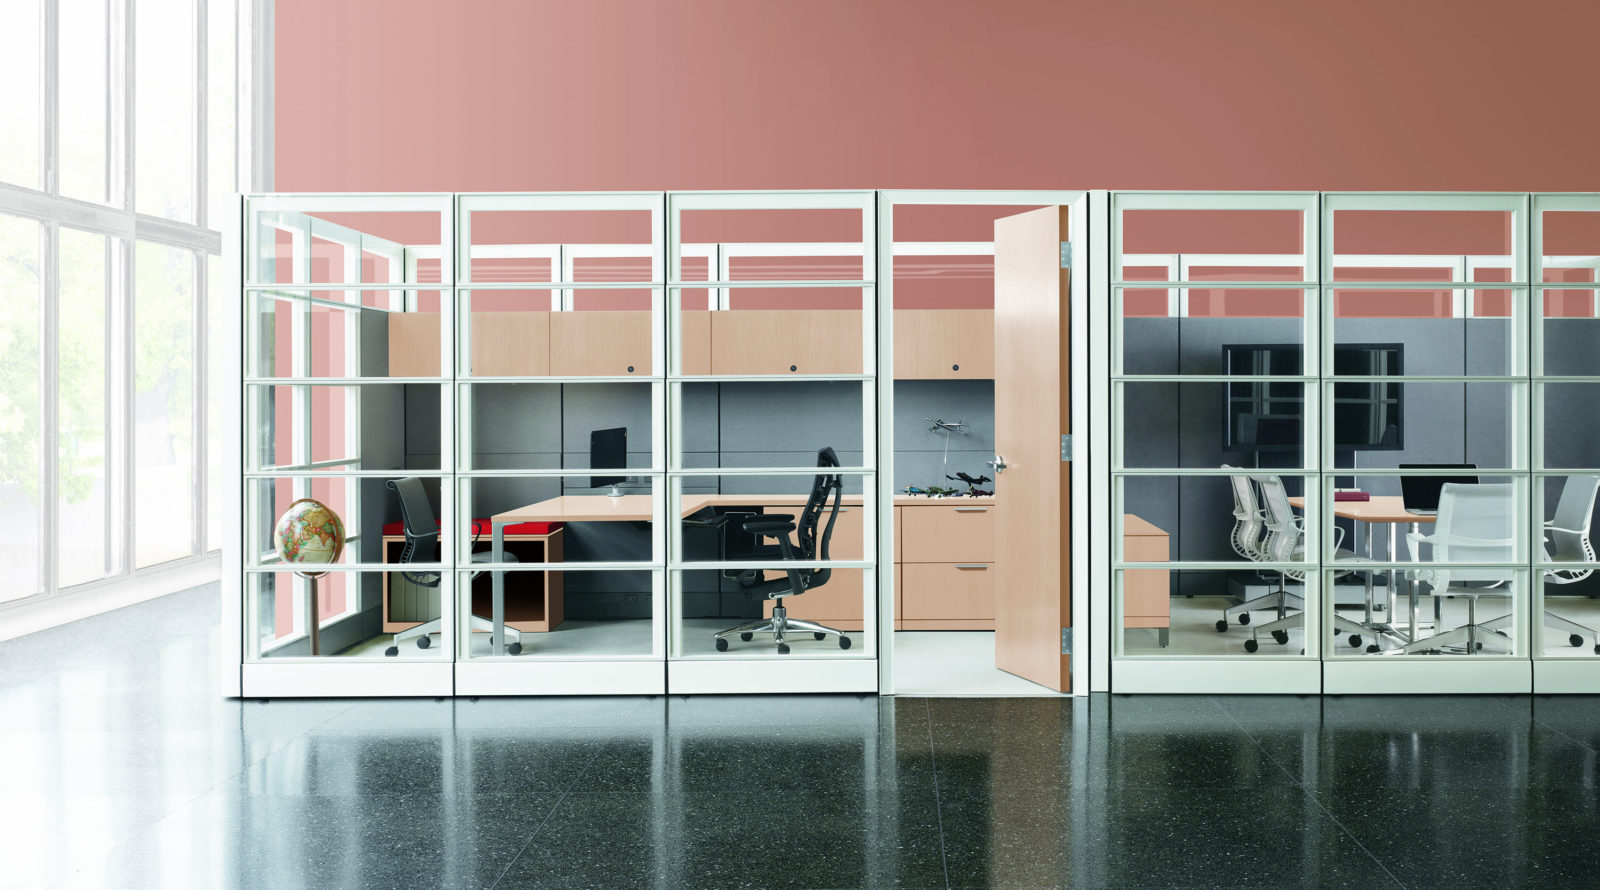 Offices enclosed by Herman Miller Ethospace glass walls. Private office is a light wood-grain laminate finish and has black Embody task chair.